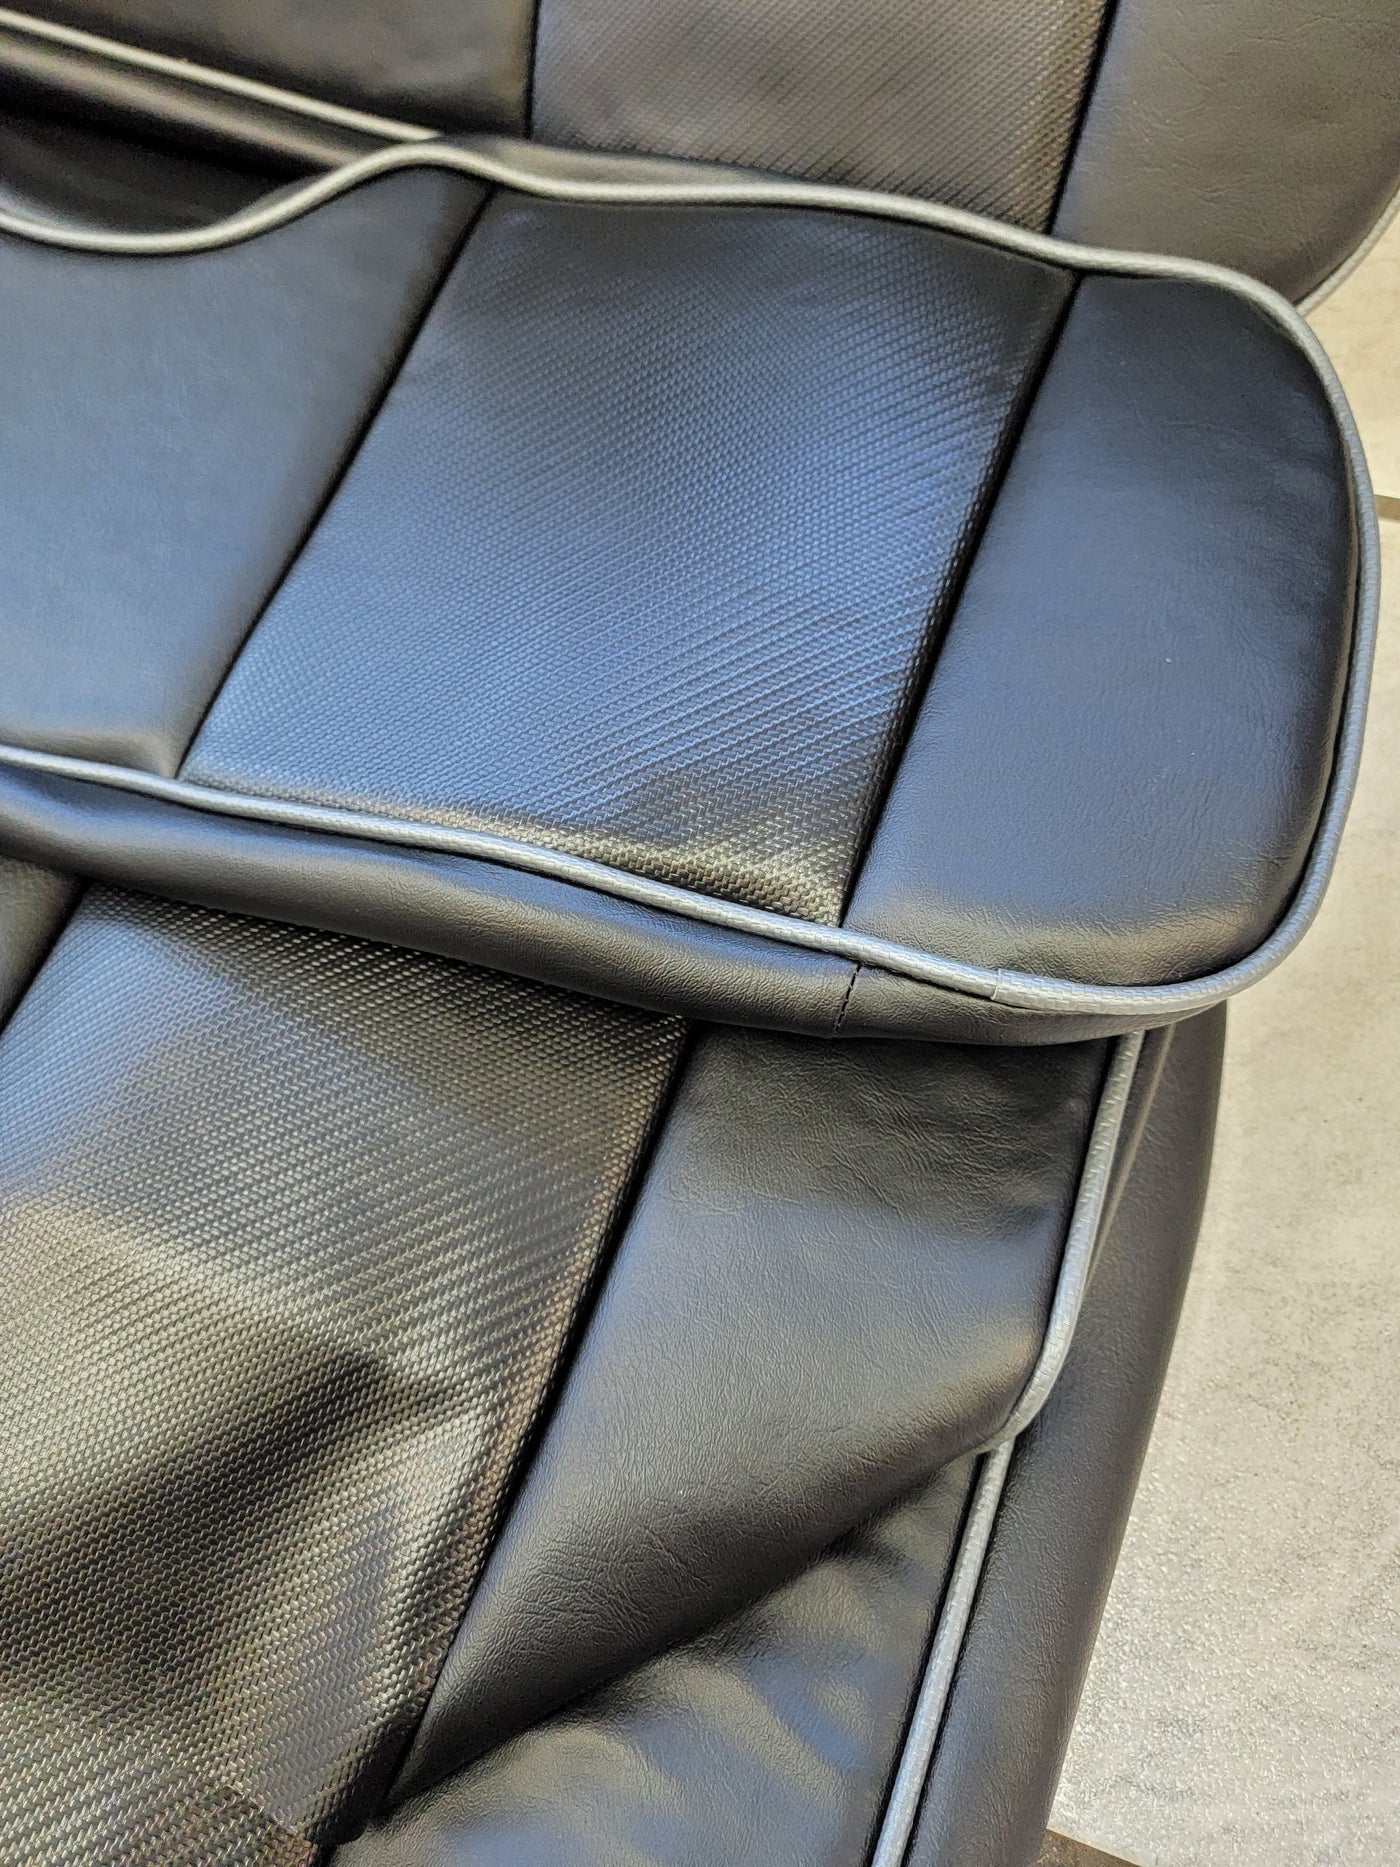 Custom Black Carbon and Black Seat Covers Ez-Go (Ezgo) Txt/Rxv 1996-Current) or Club Car DS (2000-2013) Includes Both Front Rear Seat Covers